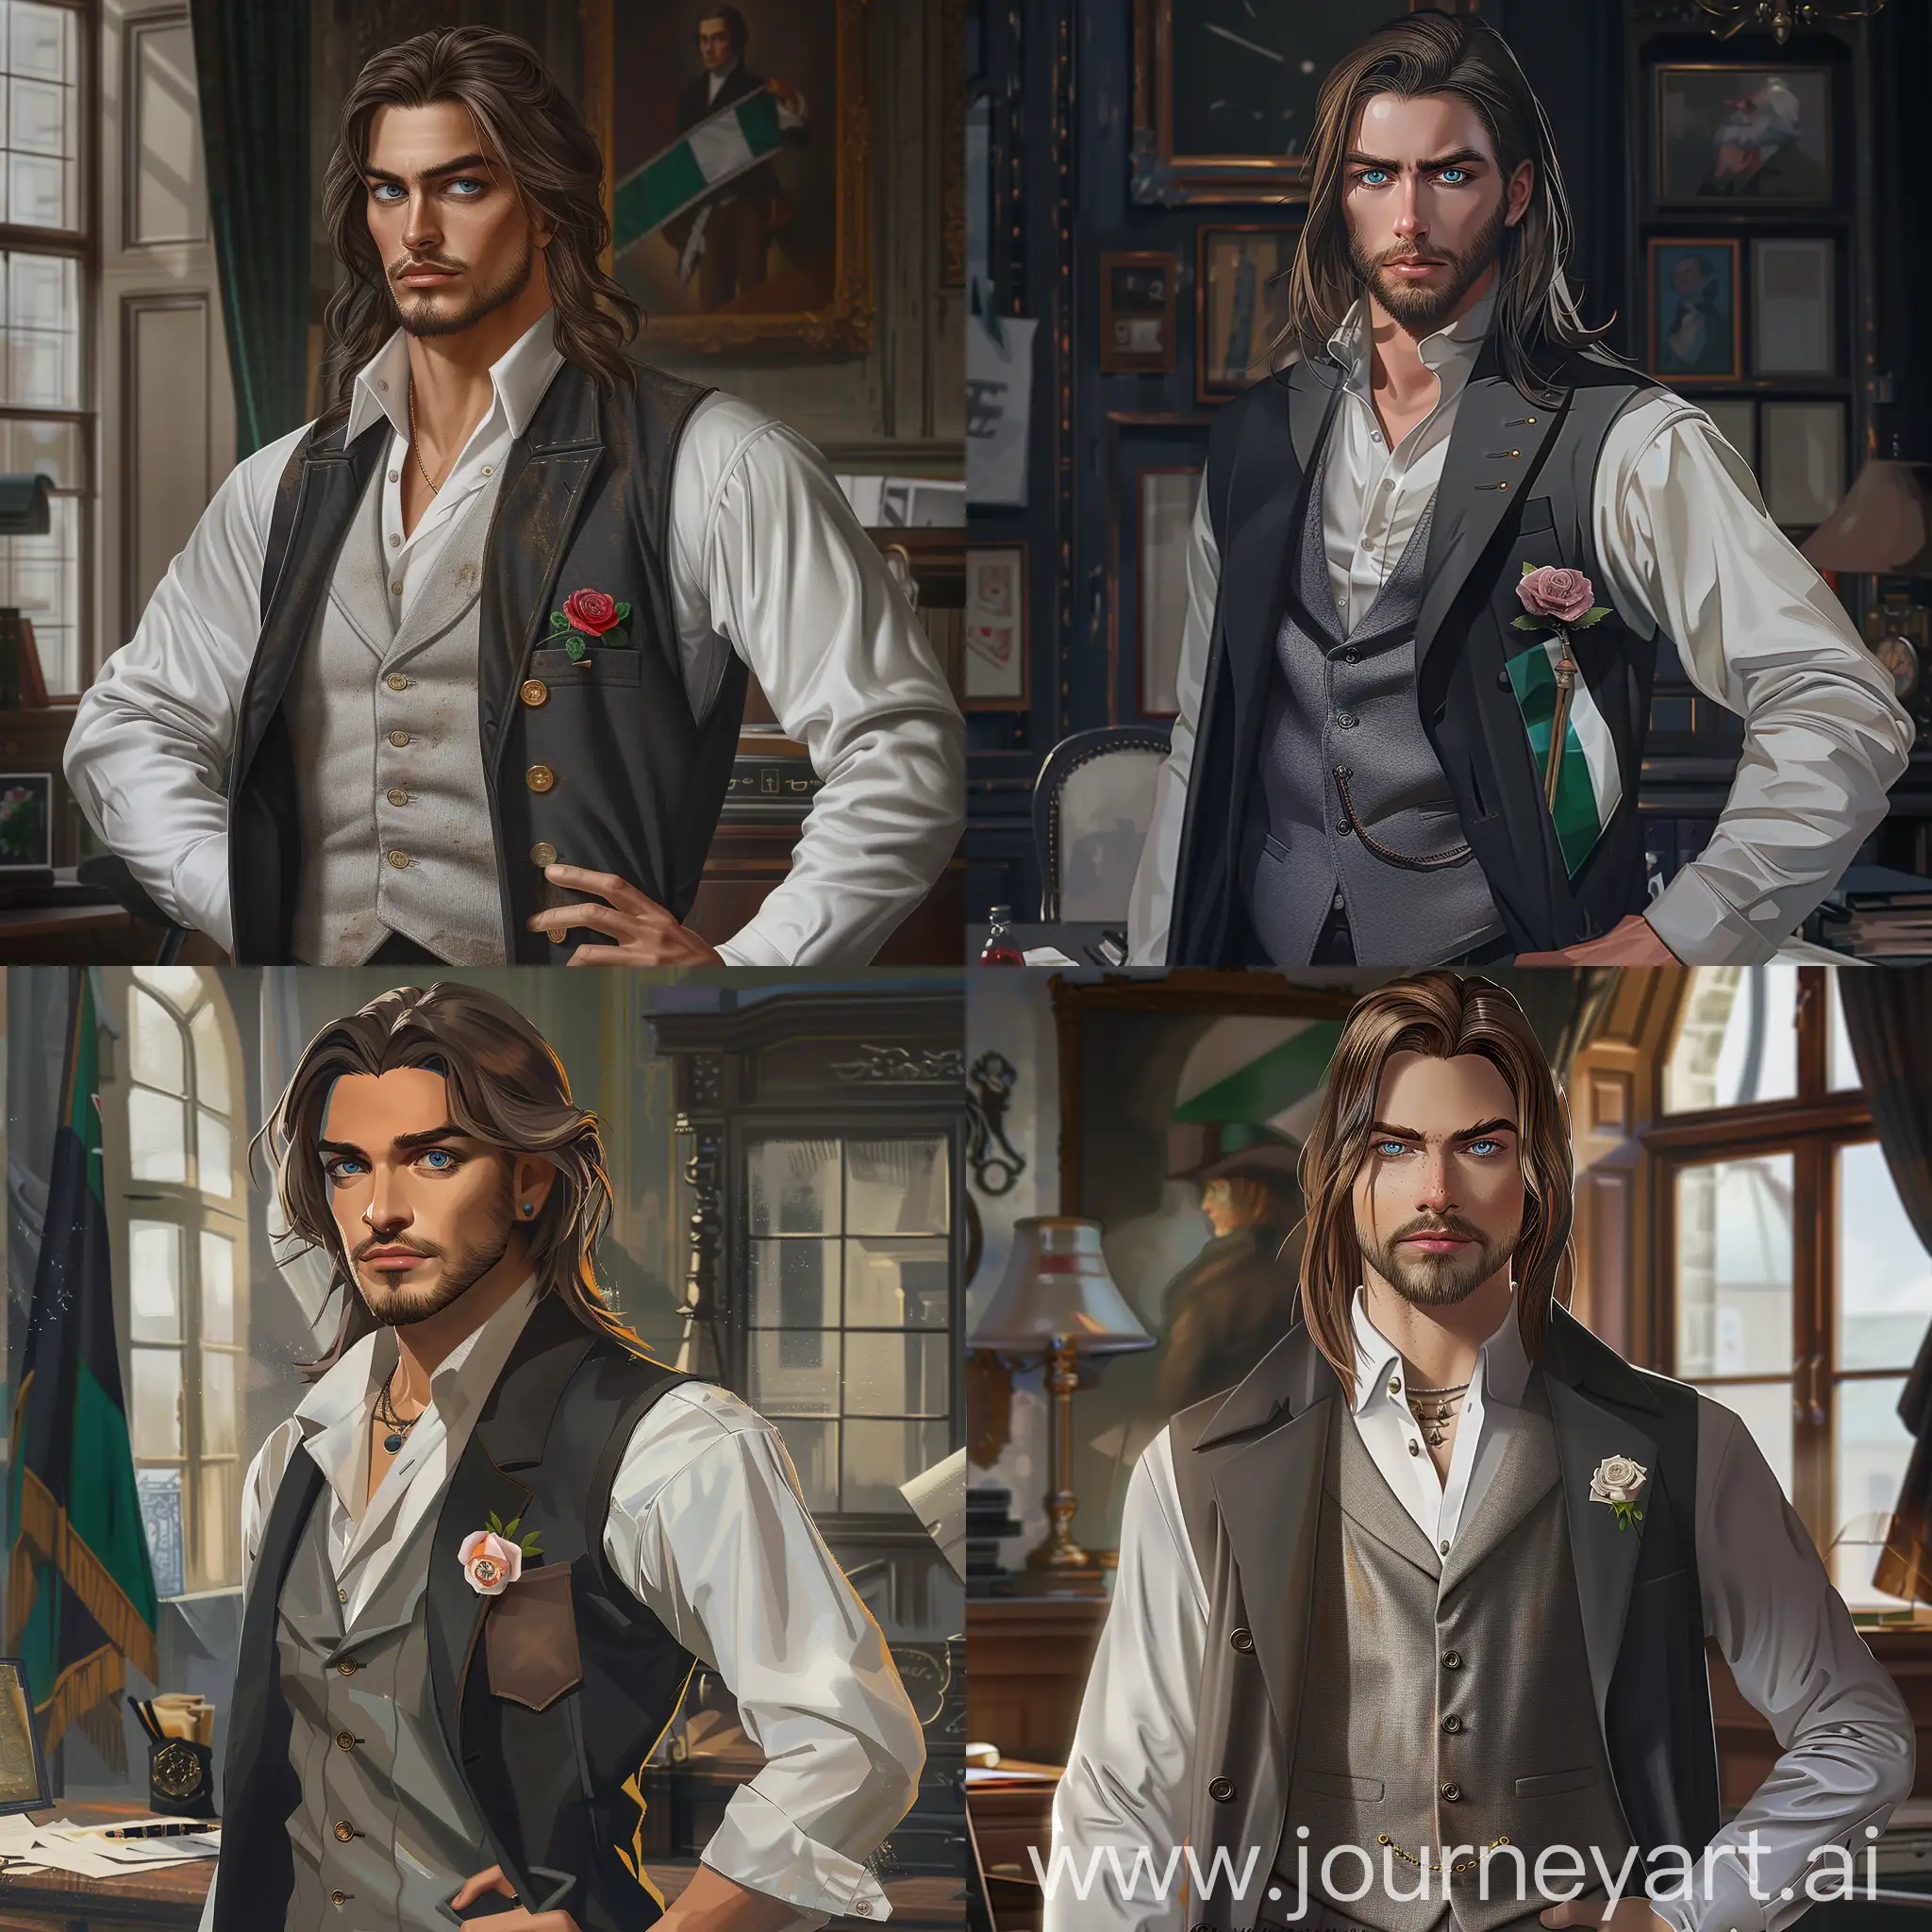 The hero of the illustration in the style of realism is dressed in a white shirt, a gray vest and a black coat with a rose in the pocket, worked out to the smallest detail, he has long straight shoulder-length hair, which combines dirty and brown shades. He has large and expressive eyes with a bright blue iris. He has stubble all the way to his lips. His posture is confident, he stands in his office, looking at the viewer, one hand on his hip, no hint of a smile on his face. The hero is a young guy who follows the fashion in the style of the 19th century. There is a black-green-white flag on the back. The focus is only on the detailed image of the character, graphic realism, photorealism, 8k, fantasy digital art, HDR, UHD.